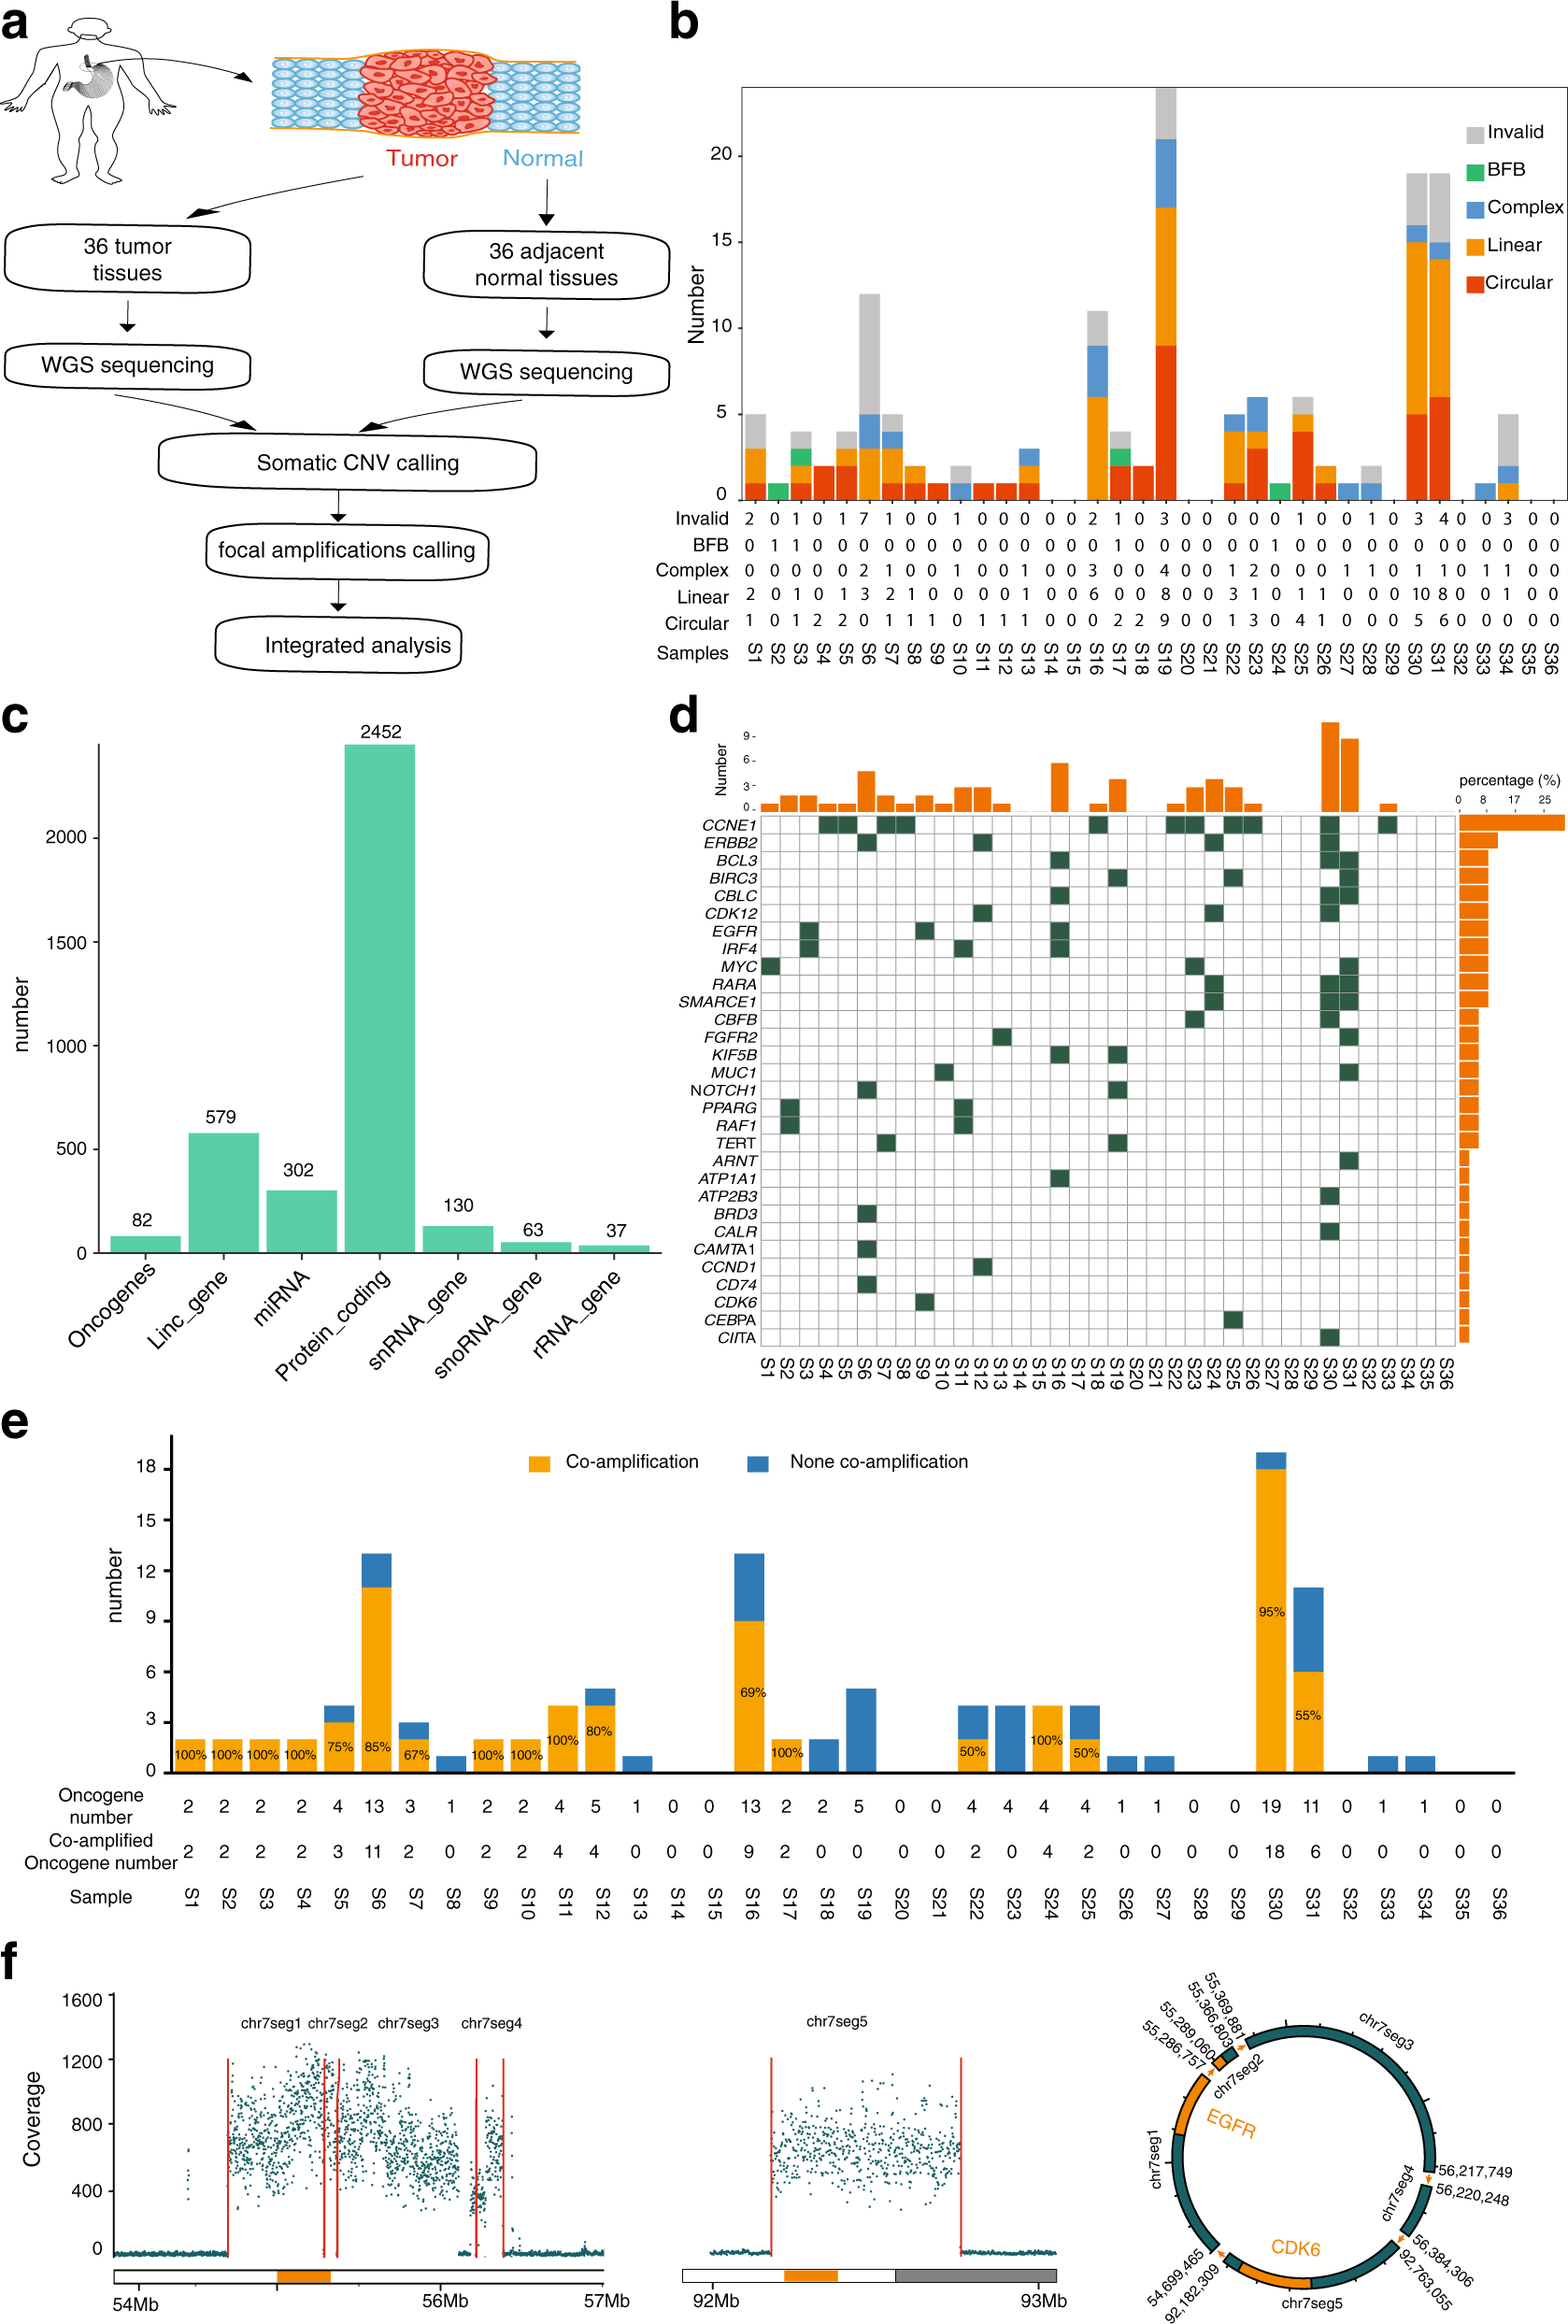 Focal amplifications are associated with chromothripsis events and diverse  prognoses in gastric cardia adenocarcinoma | Nature Communications